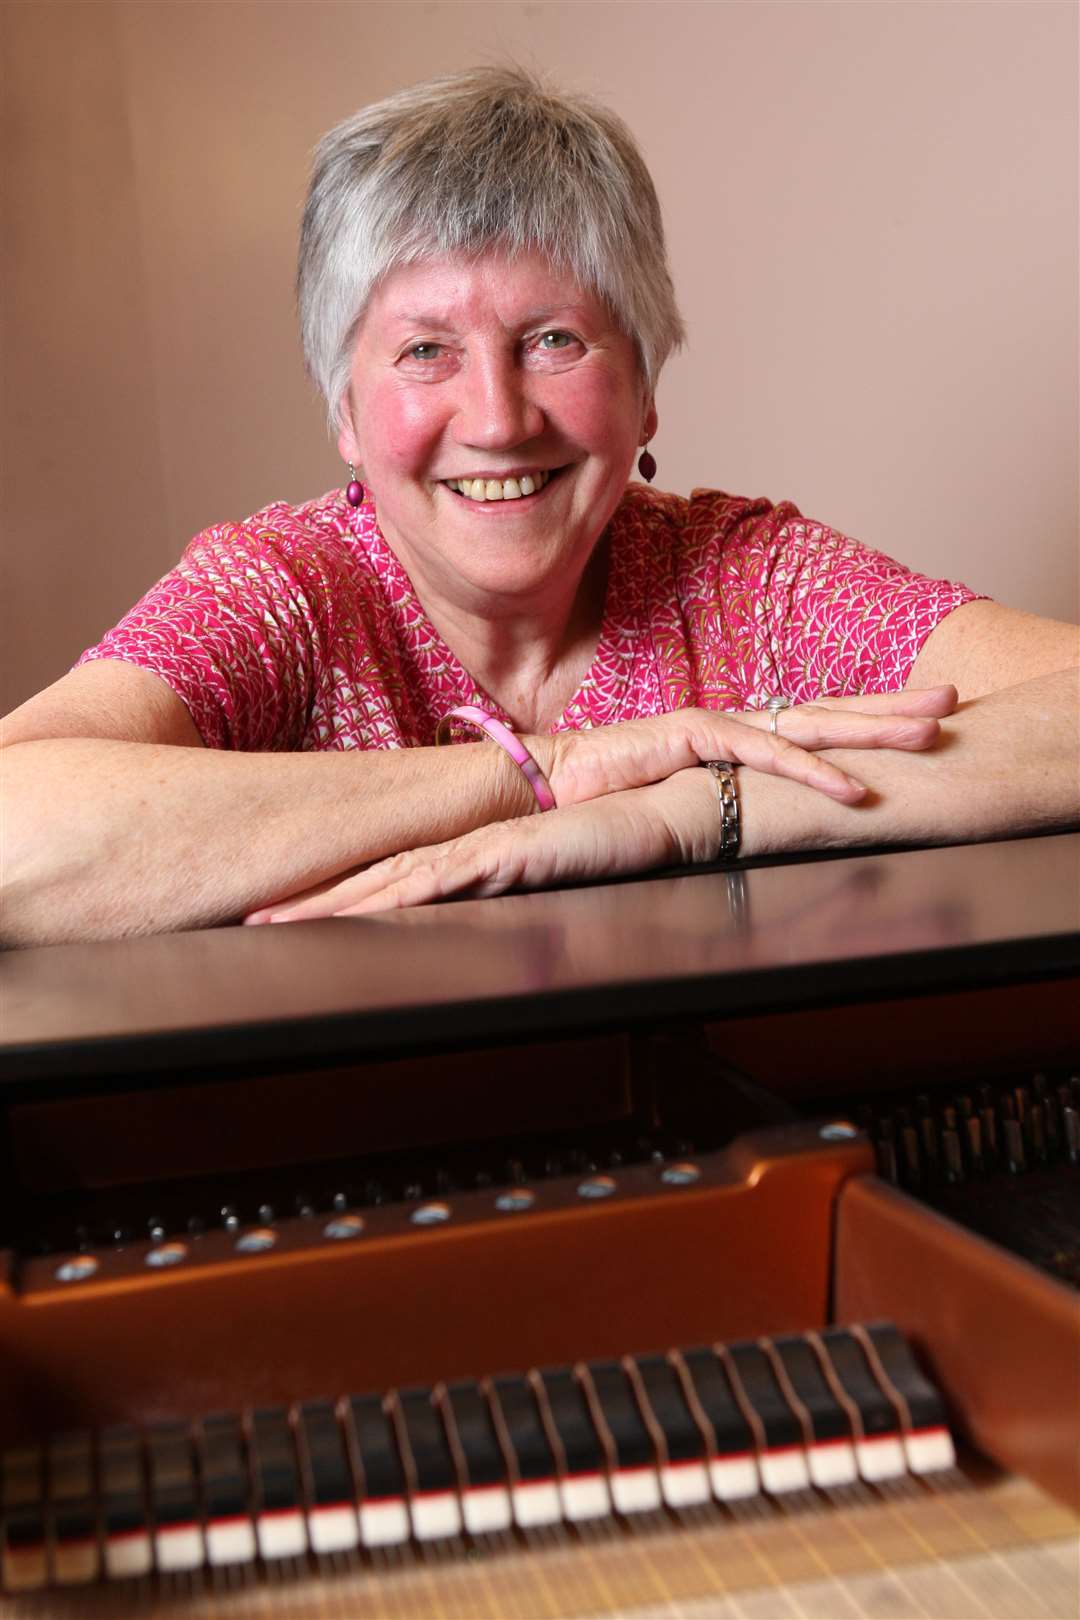 Sheila Bruce the long-term pianist and accompanist with Inverness Choral Society plays for the last time with them today at the Carolthon in the Eastgate Centre!